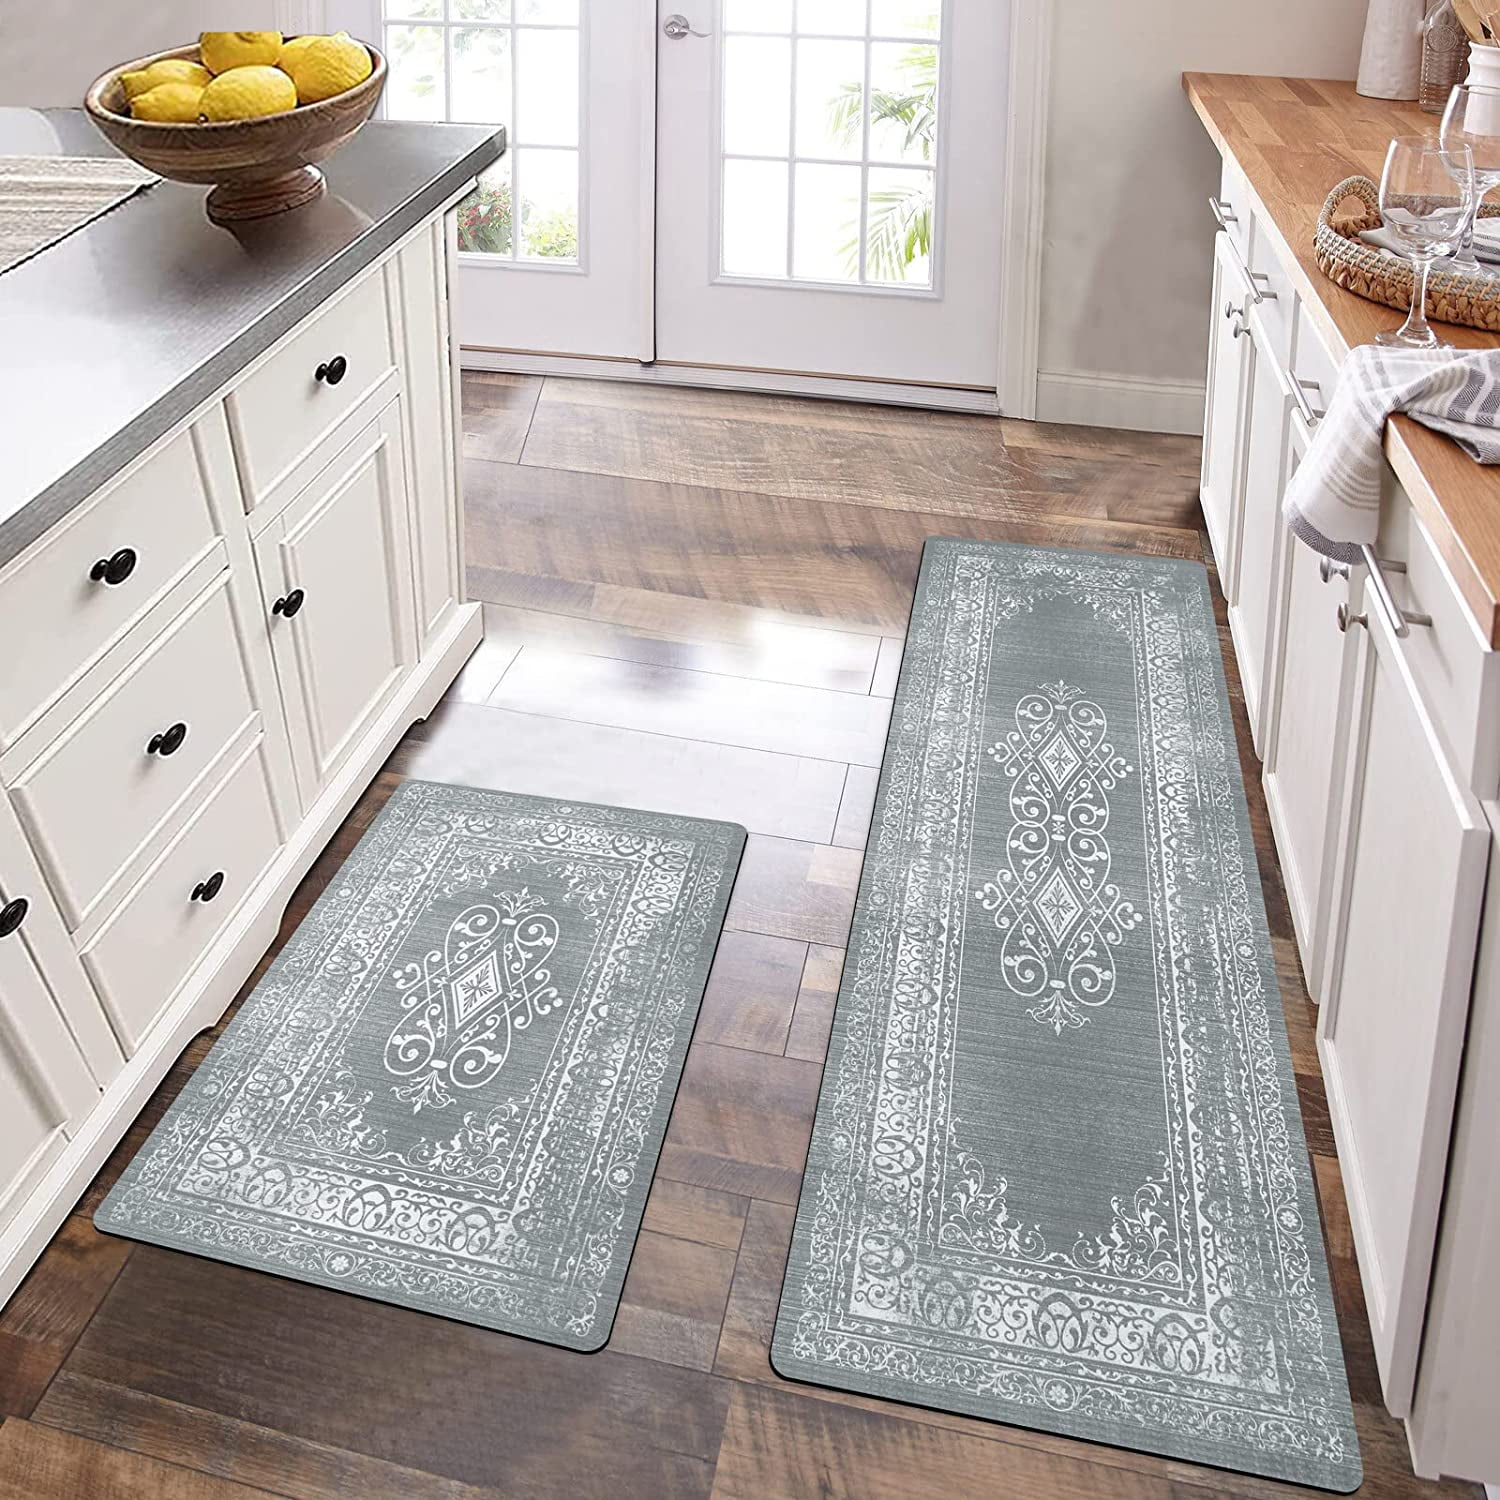 SIXHOME Kitchen Rugs Washable Non Slip Runner Rugs Farmhouse